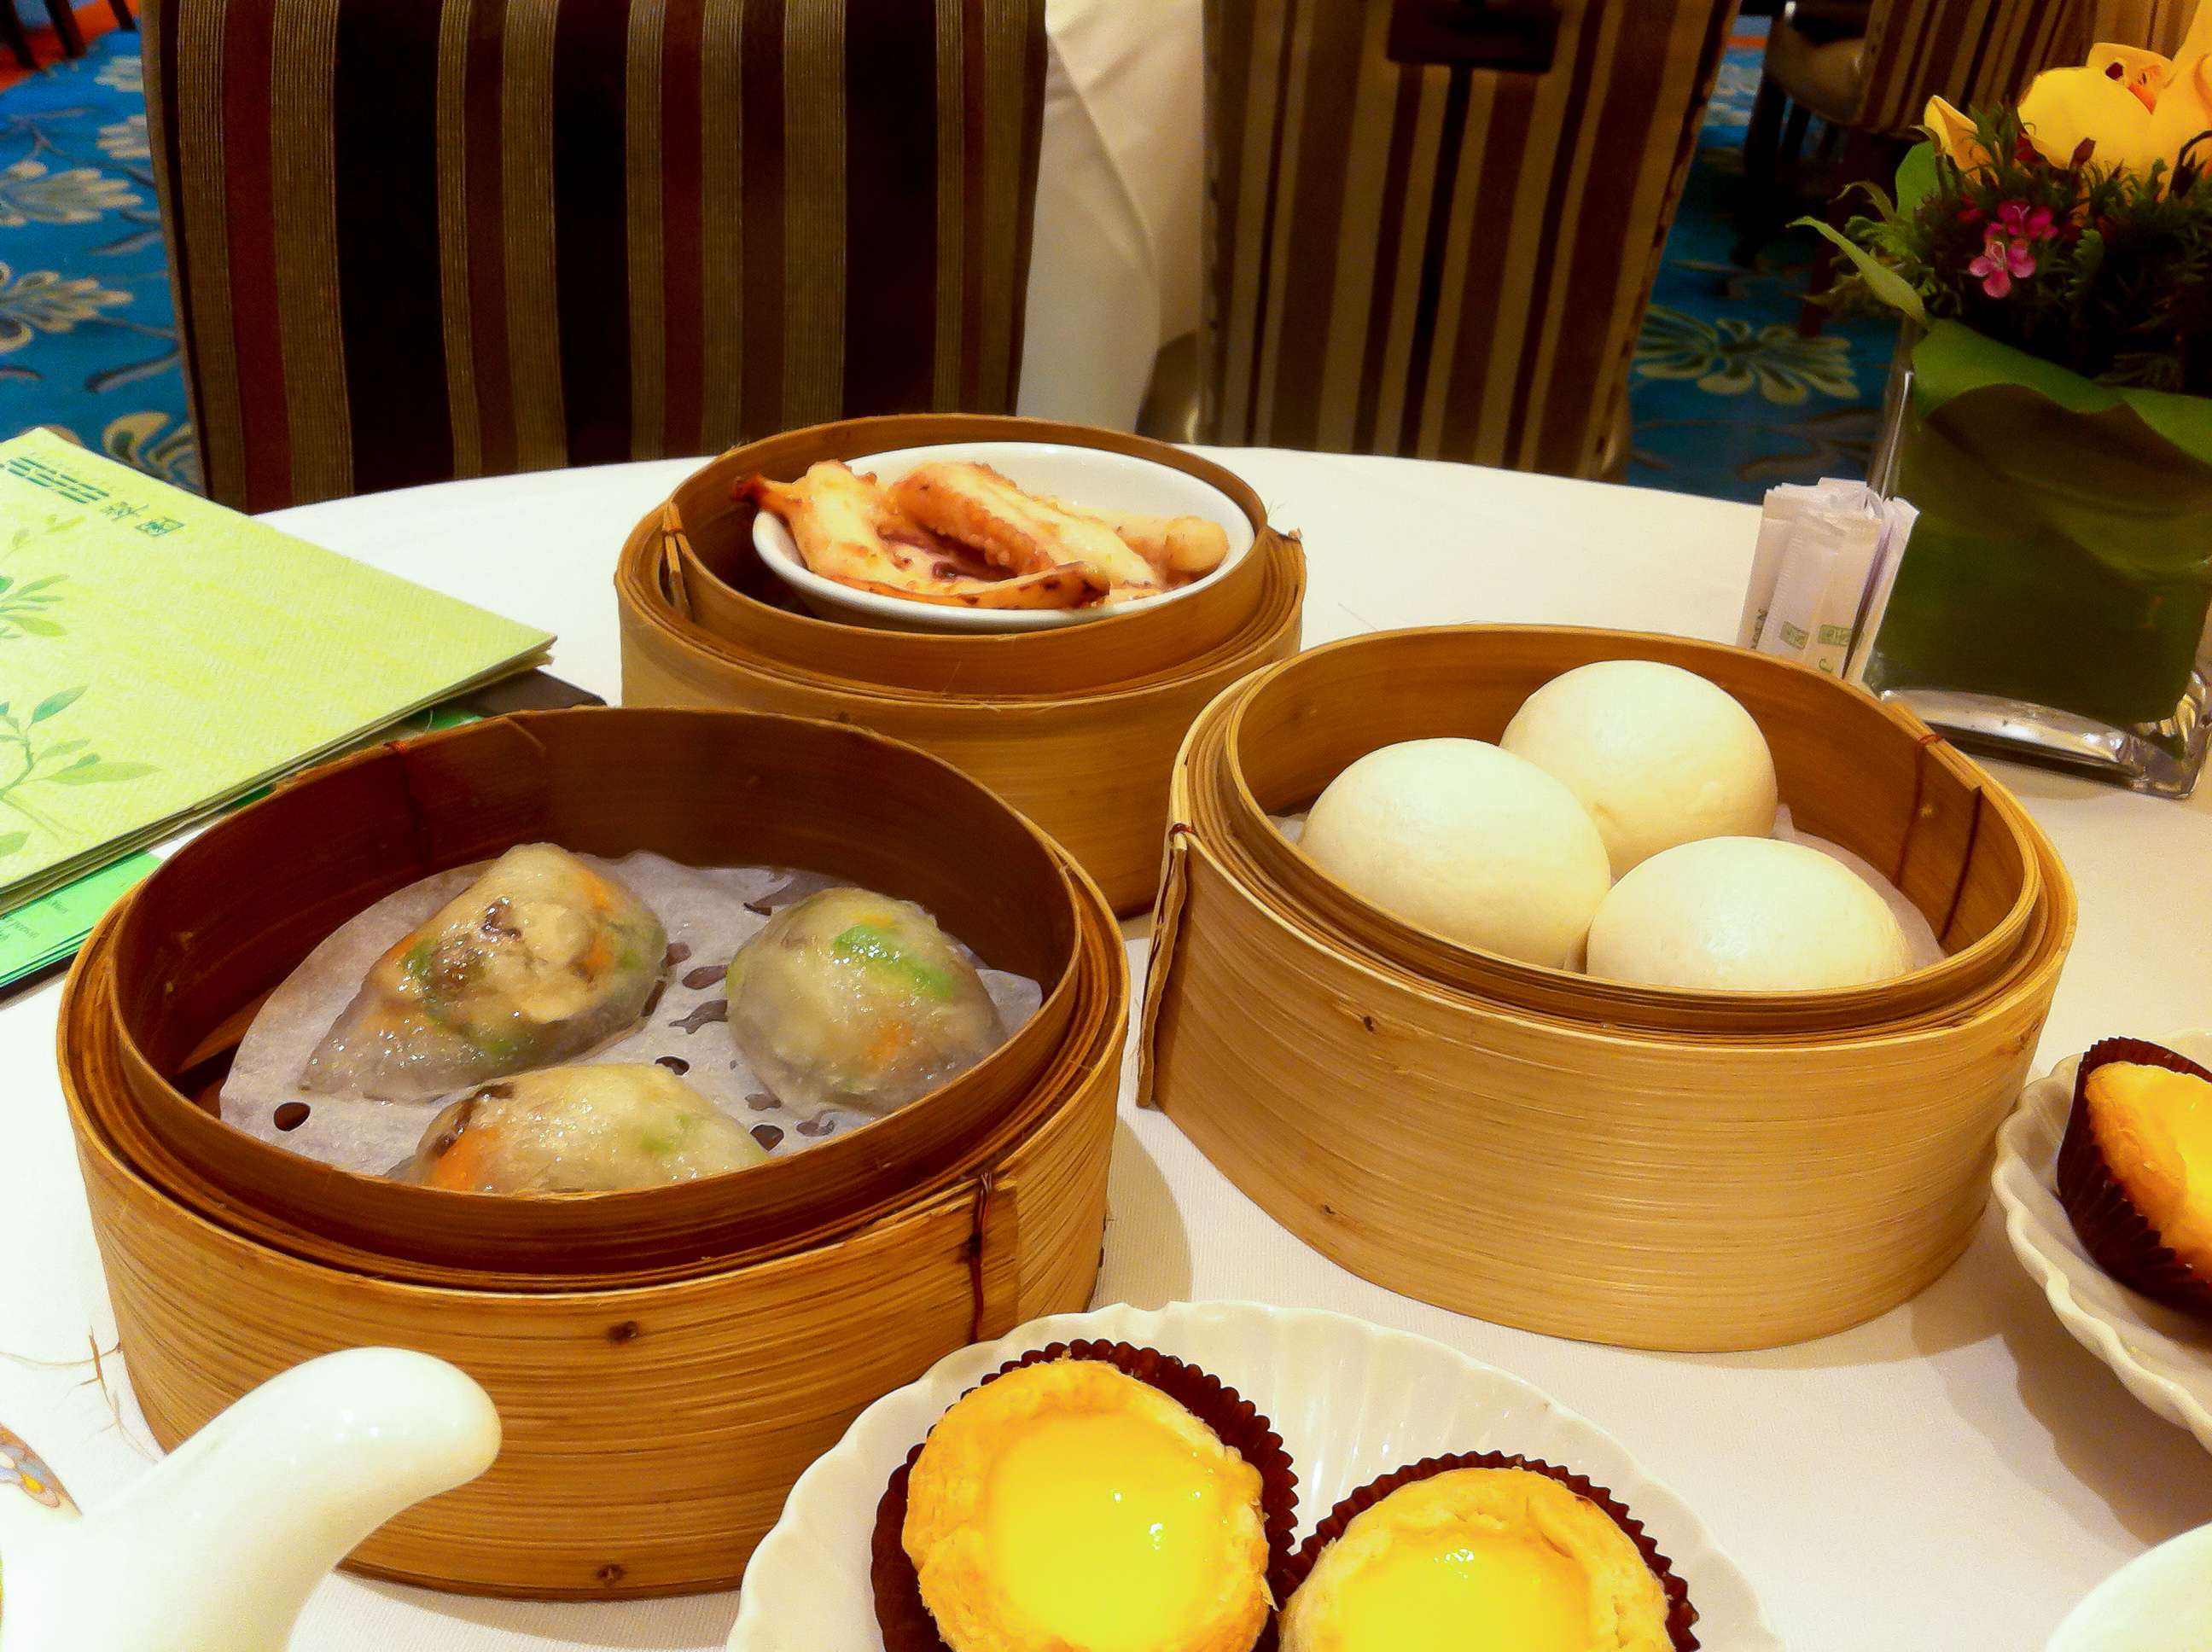 Dim Sum spread at Crystal Jade in Hong Kong. Photo by alphacityguides.